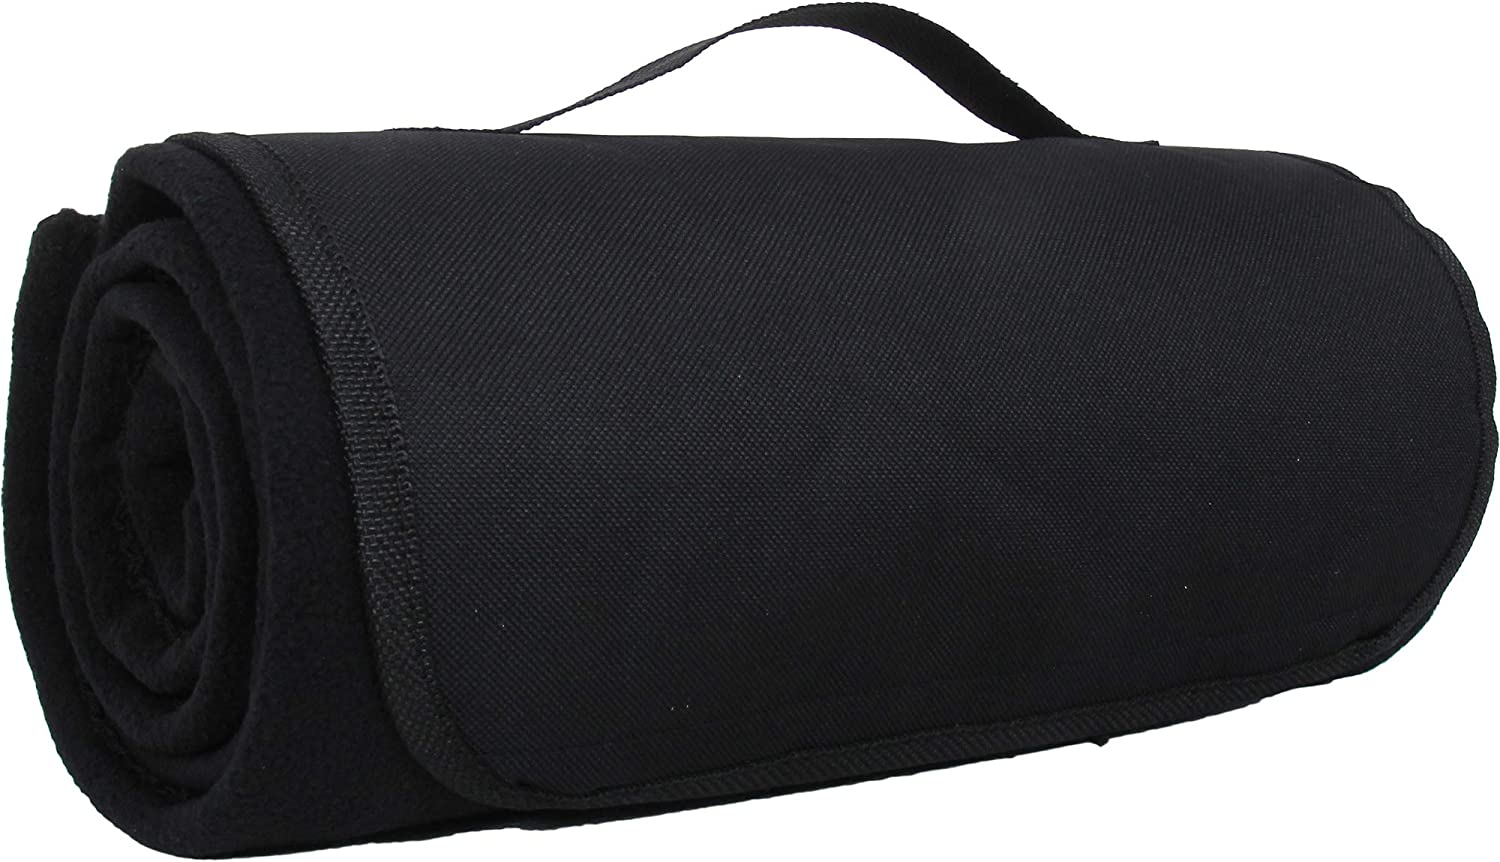 Threadart Portable Sports Stadium Blanket with Carrying Strap | Packable for Travel | Soft Fleece Fabric | 58in x 48in – Black – 5 Colors Available